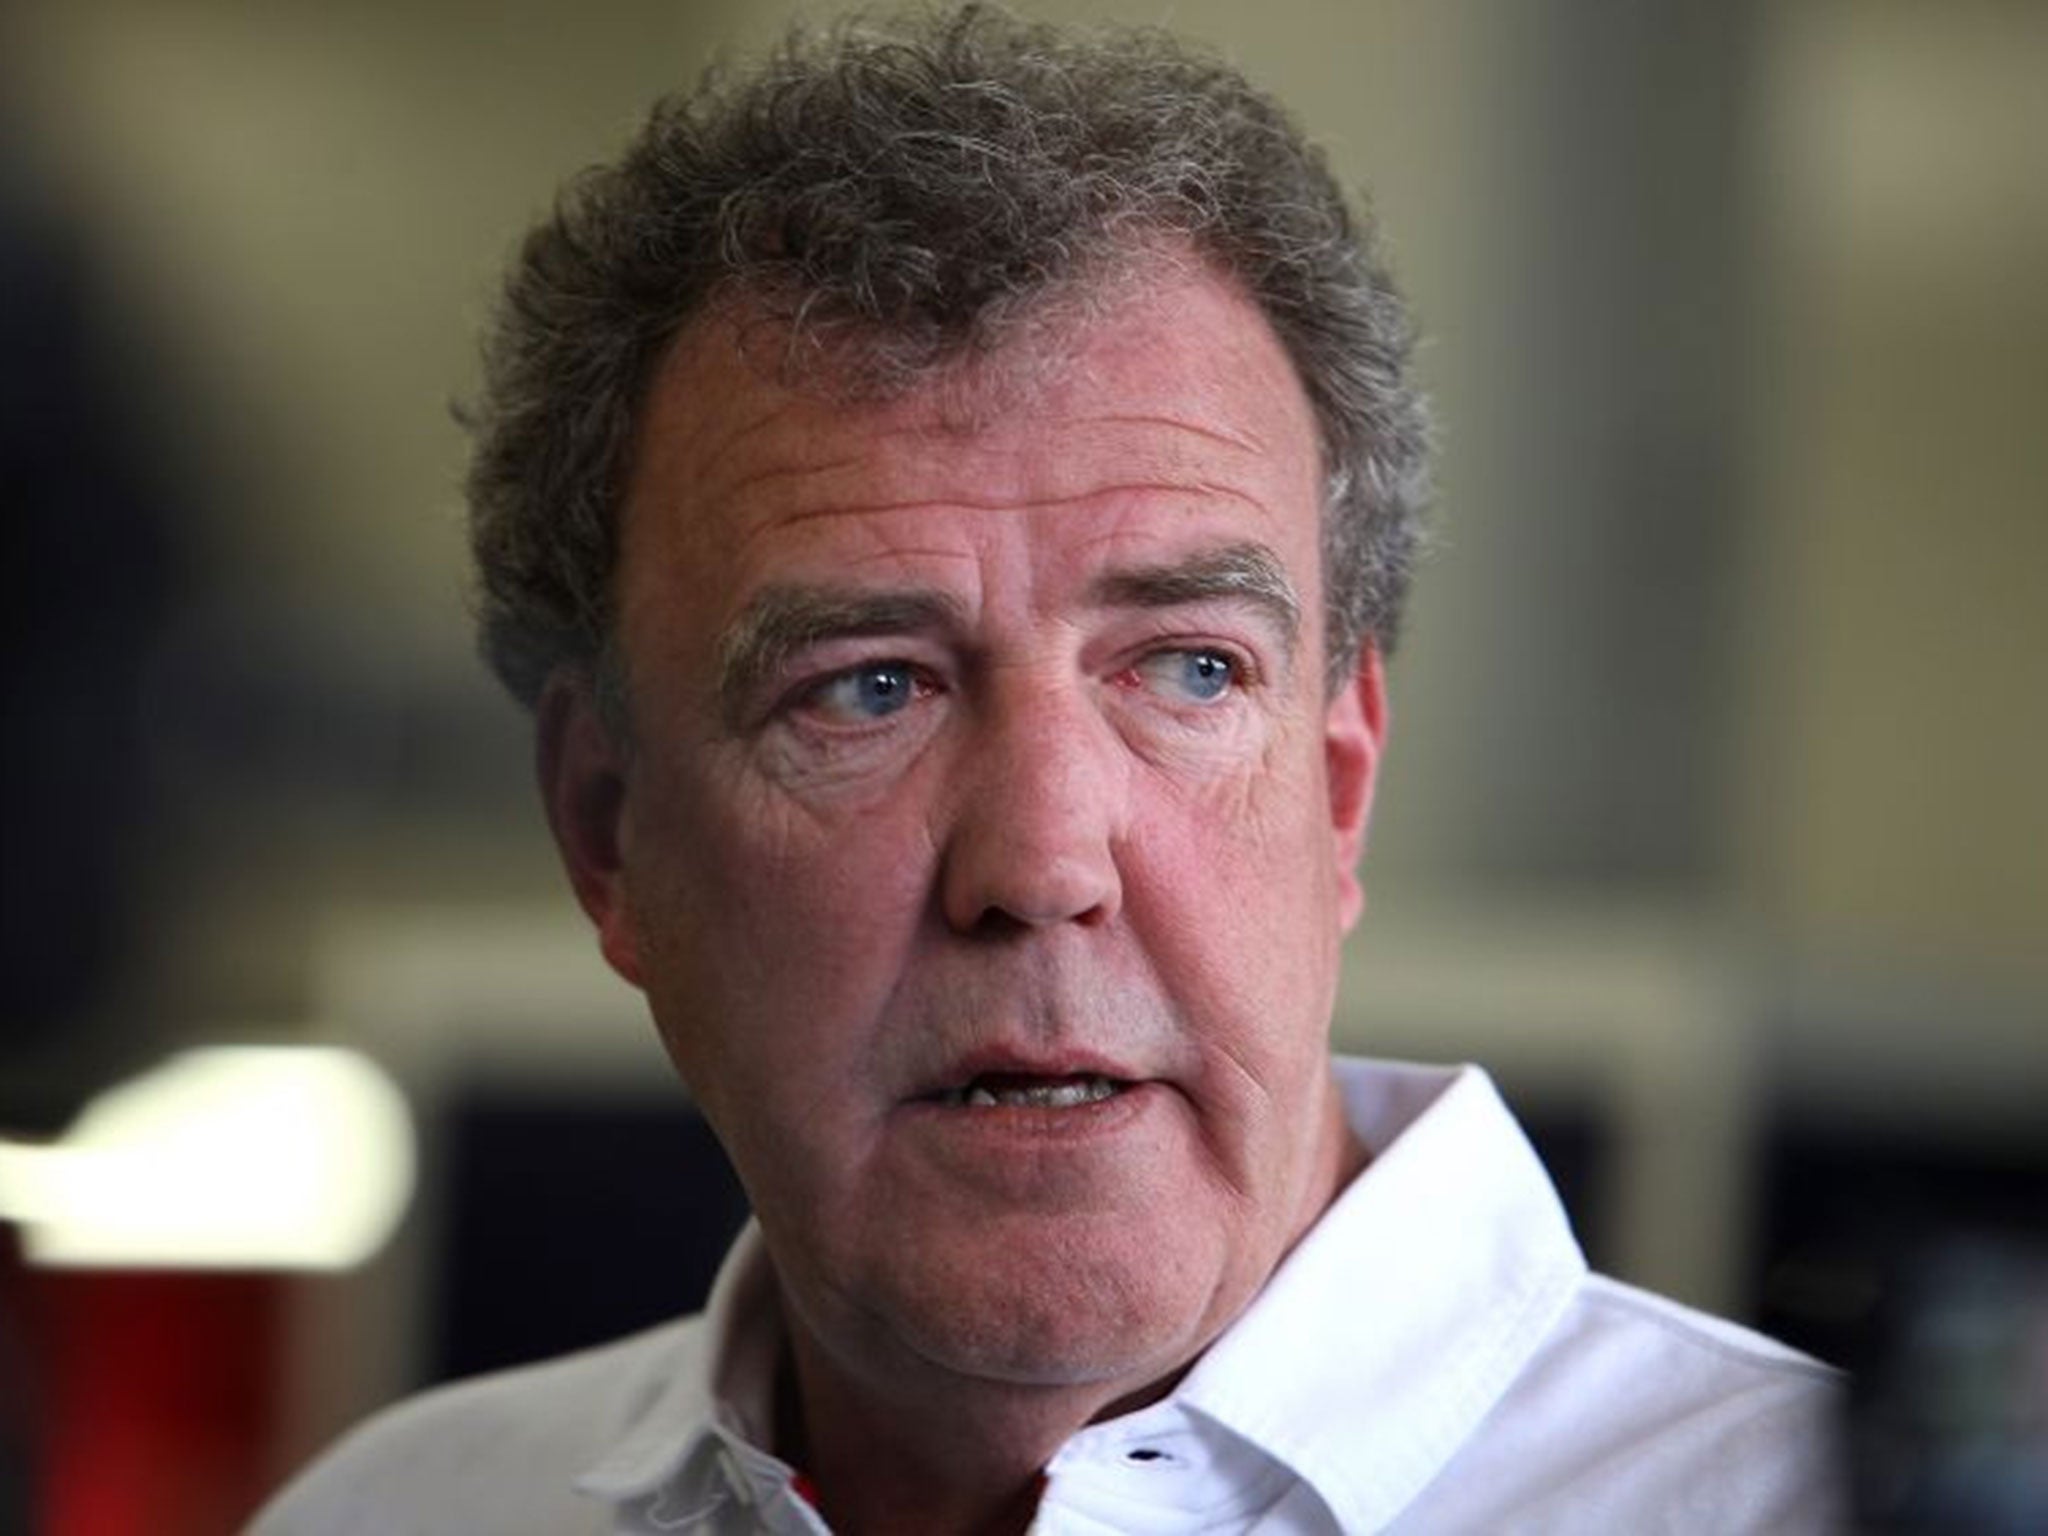 Jeremy Clarkson has been suspended from the BBC